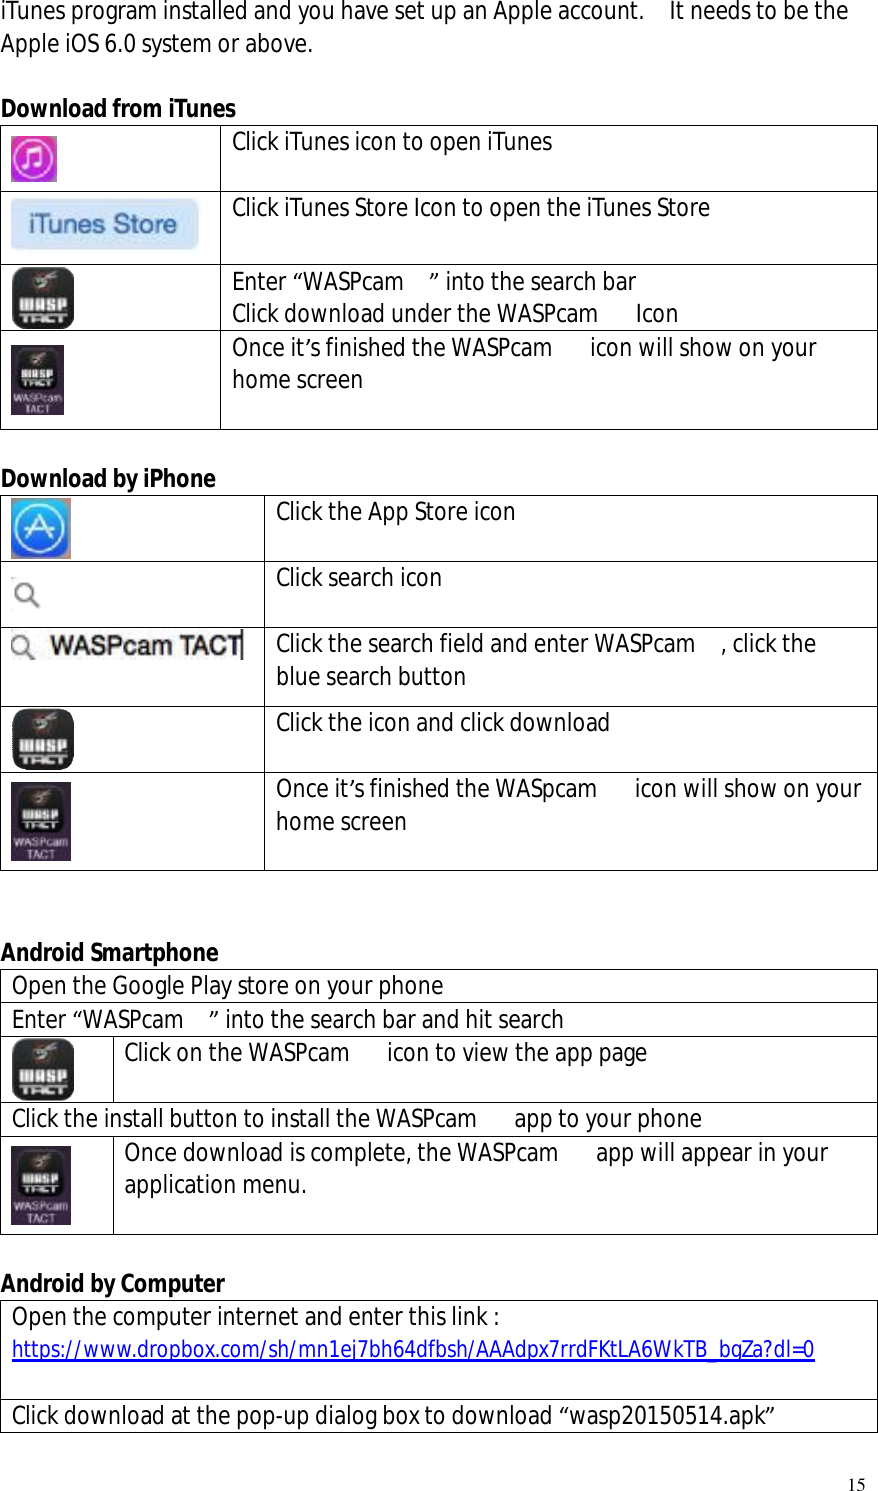   15 iTunes program installed and you have set up an Apple account.  It needs to be the Apple iOS 6.0 system or above.   Download from iTunes  Click iTunes icon to open iTunes   Click iTunes Store Icon to open the iTunes Store  Enter “WASPcam  ” into the search bar Click download under the WASPcam   Icon  Once it’s finished the WASPcam   icon will show on your home screen   Download by iPhone  Click the App Store icon   Click search icon  Click the search field and enter WASPcam  , click the blue search button  Click the icon and click download  Once it’s finished the WASpcam   icon will show on your home screen   Android Smartphone Open the Google Play store on your phone Enter “WASPcam  ” into the search bar and hit search  Click on the WASPcam   icon to view the app page  Click the install button to install the WASPcam   app to your phone  Once download is complete, the WASPcam   app will appear in your application menu.    Android by Computer Open the computer internet and enter this link : https://www.dropbox.com/sh/mn1ej7bh64dfbsh/AAAdpx7rrdFKtLA6WkTB_bgZa?dl=0  Click download at the pop-up dialog box to download “wasp20150514.apk” 